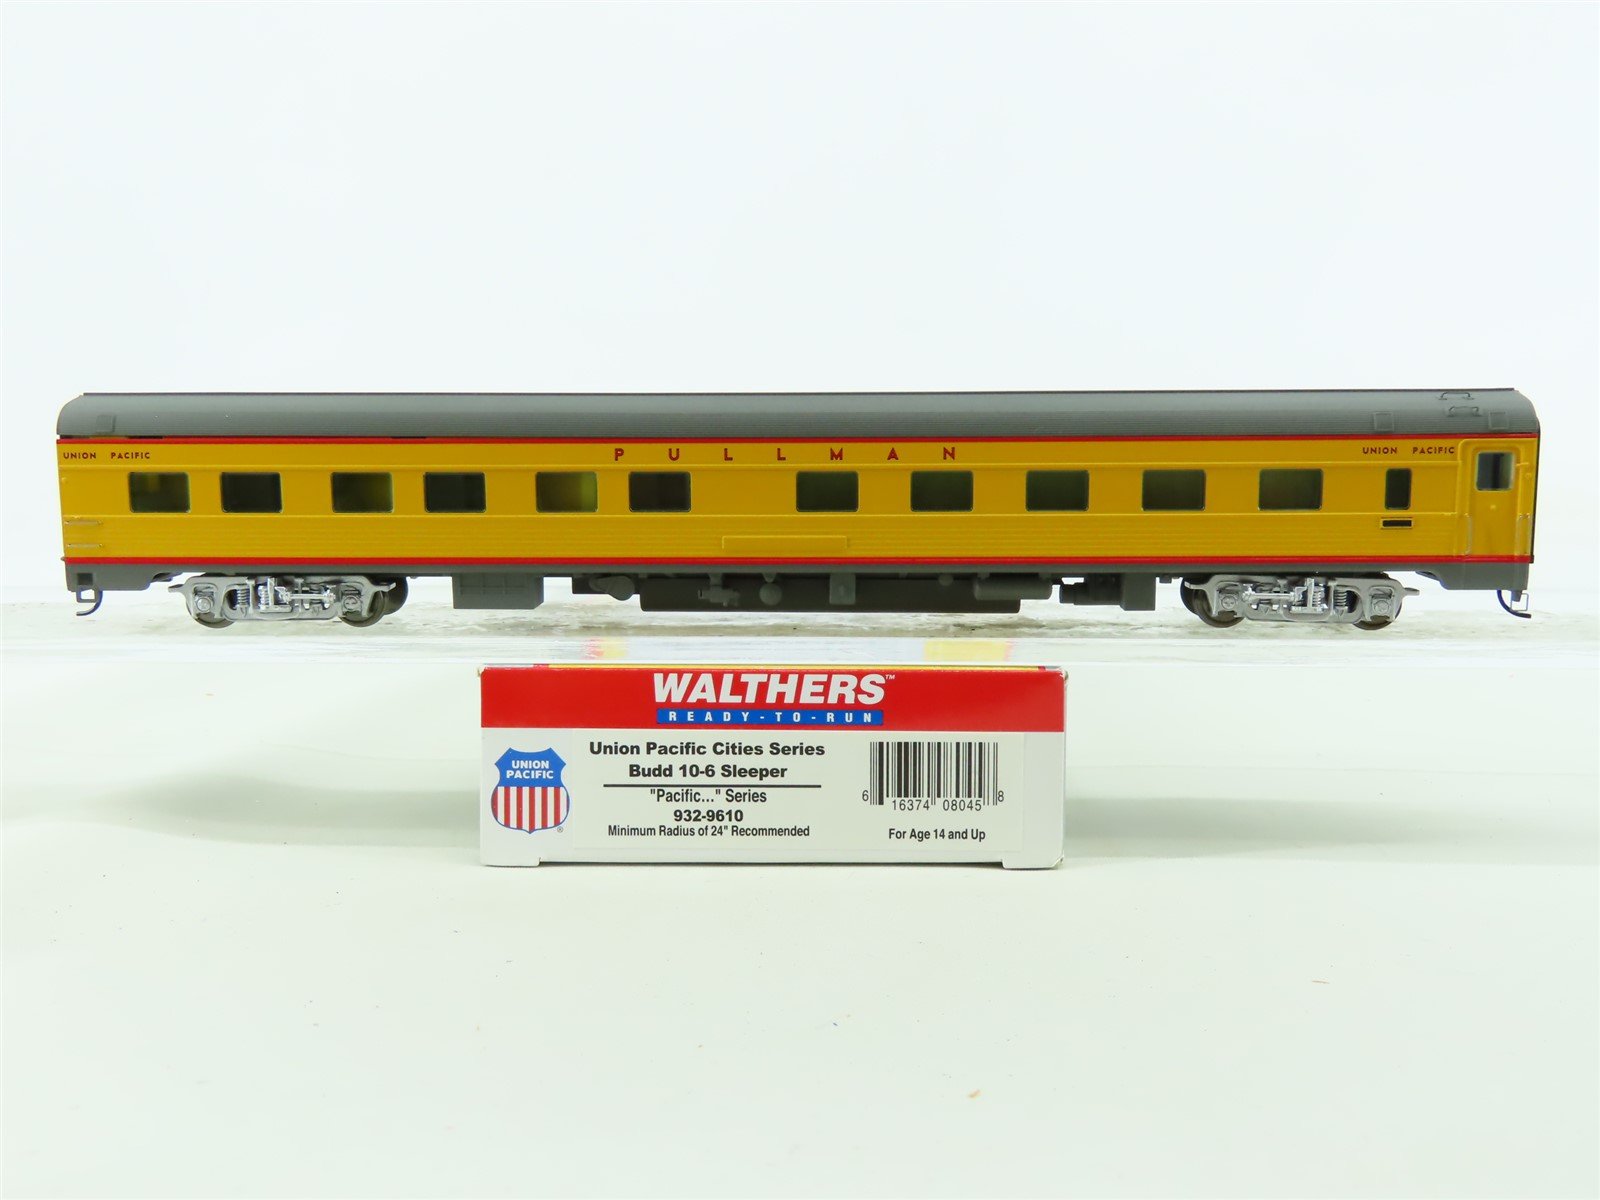 HO Walthers 932-9610 UP Union Pacific "Pacific" Series 10-6 Sleeper Passenger